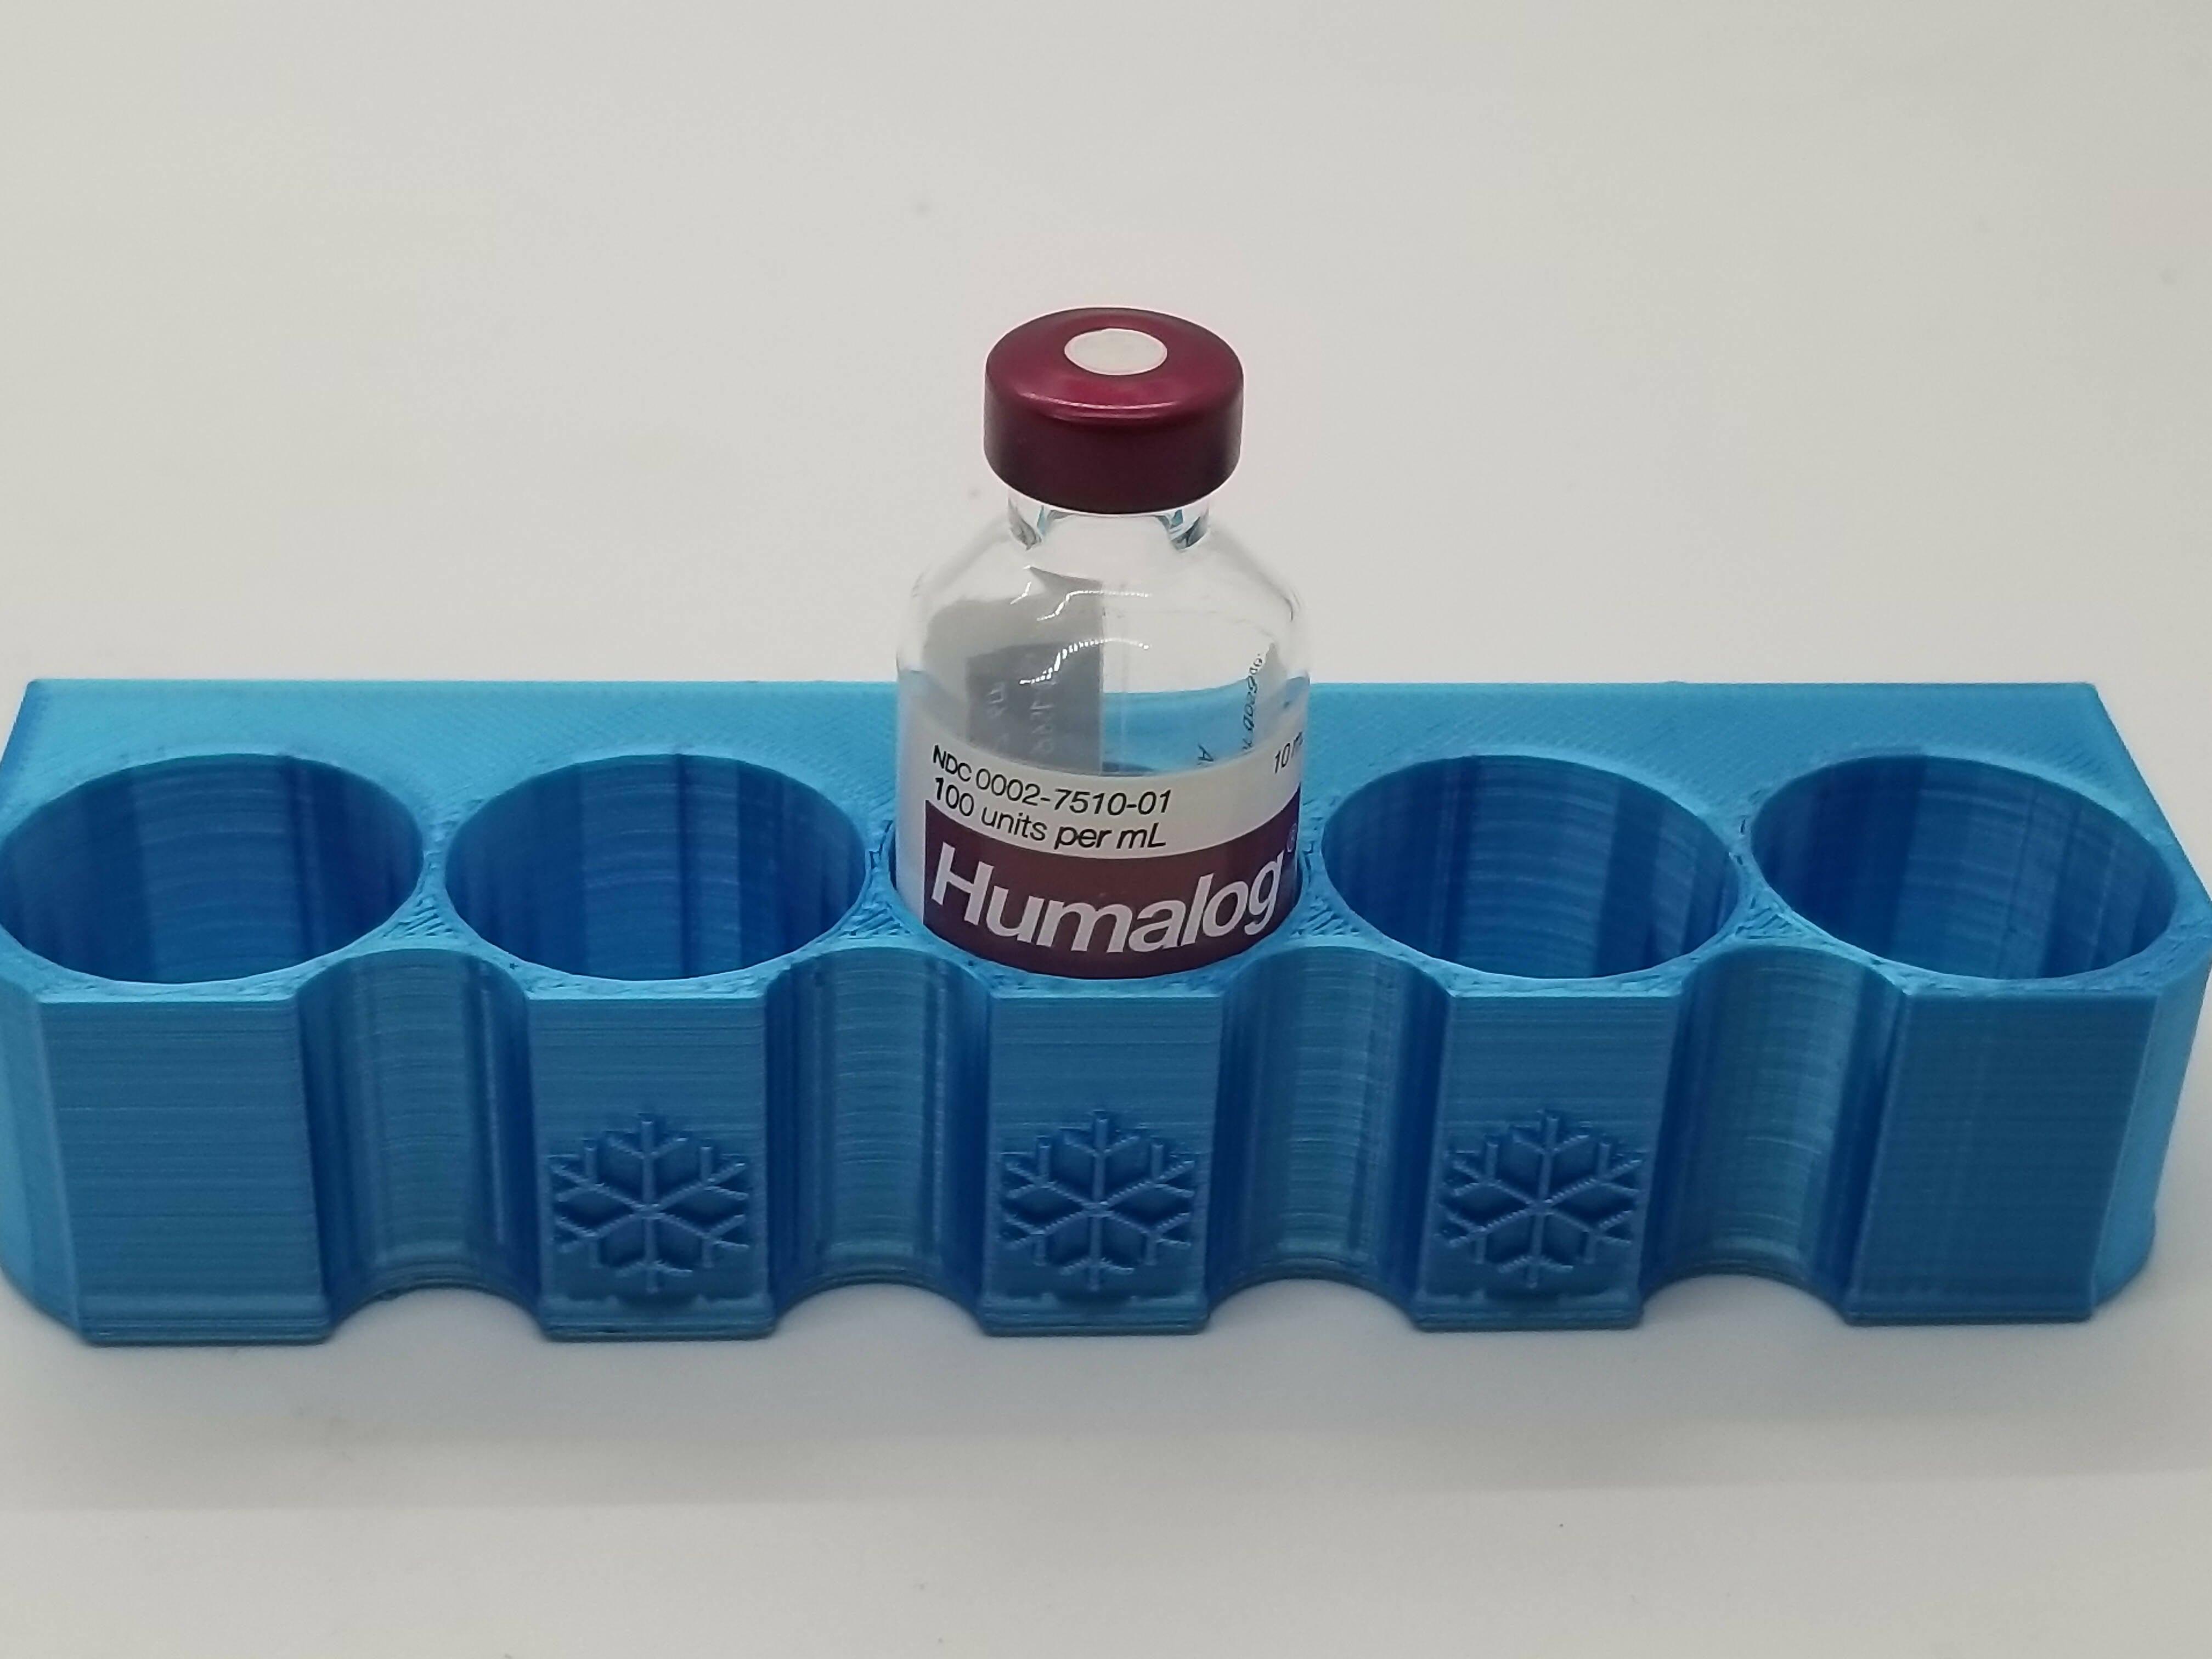 Insulin Vial Holder, Holds up to 10 vials – The Useless Pancreas